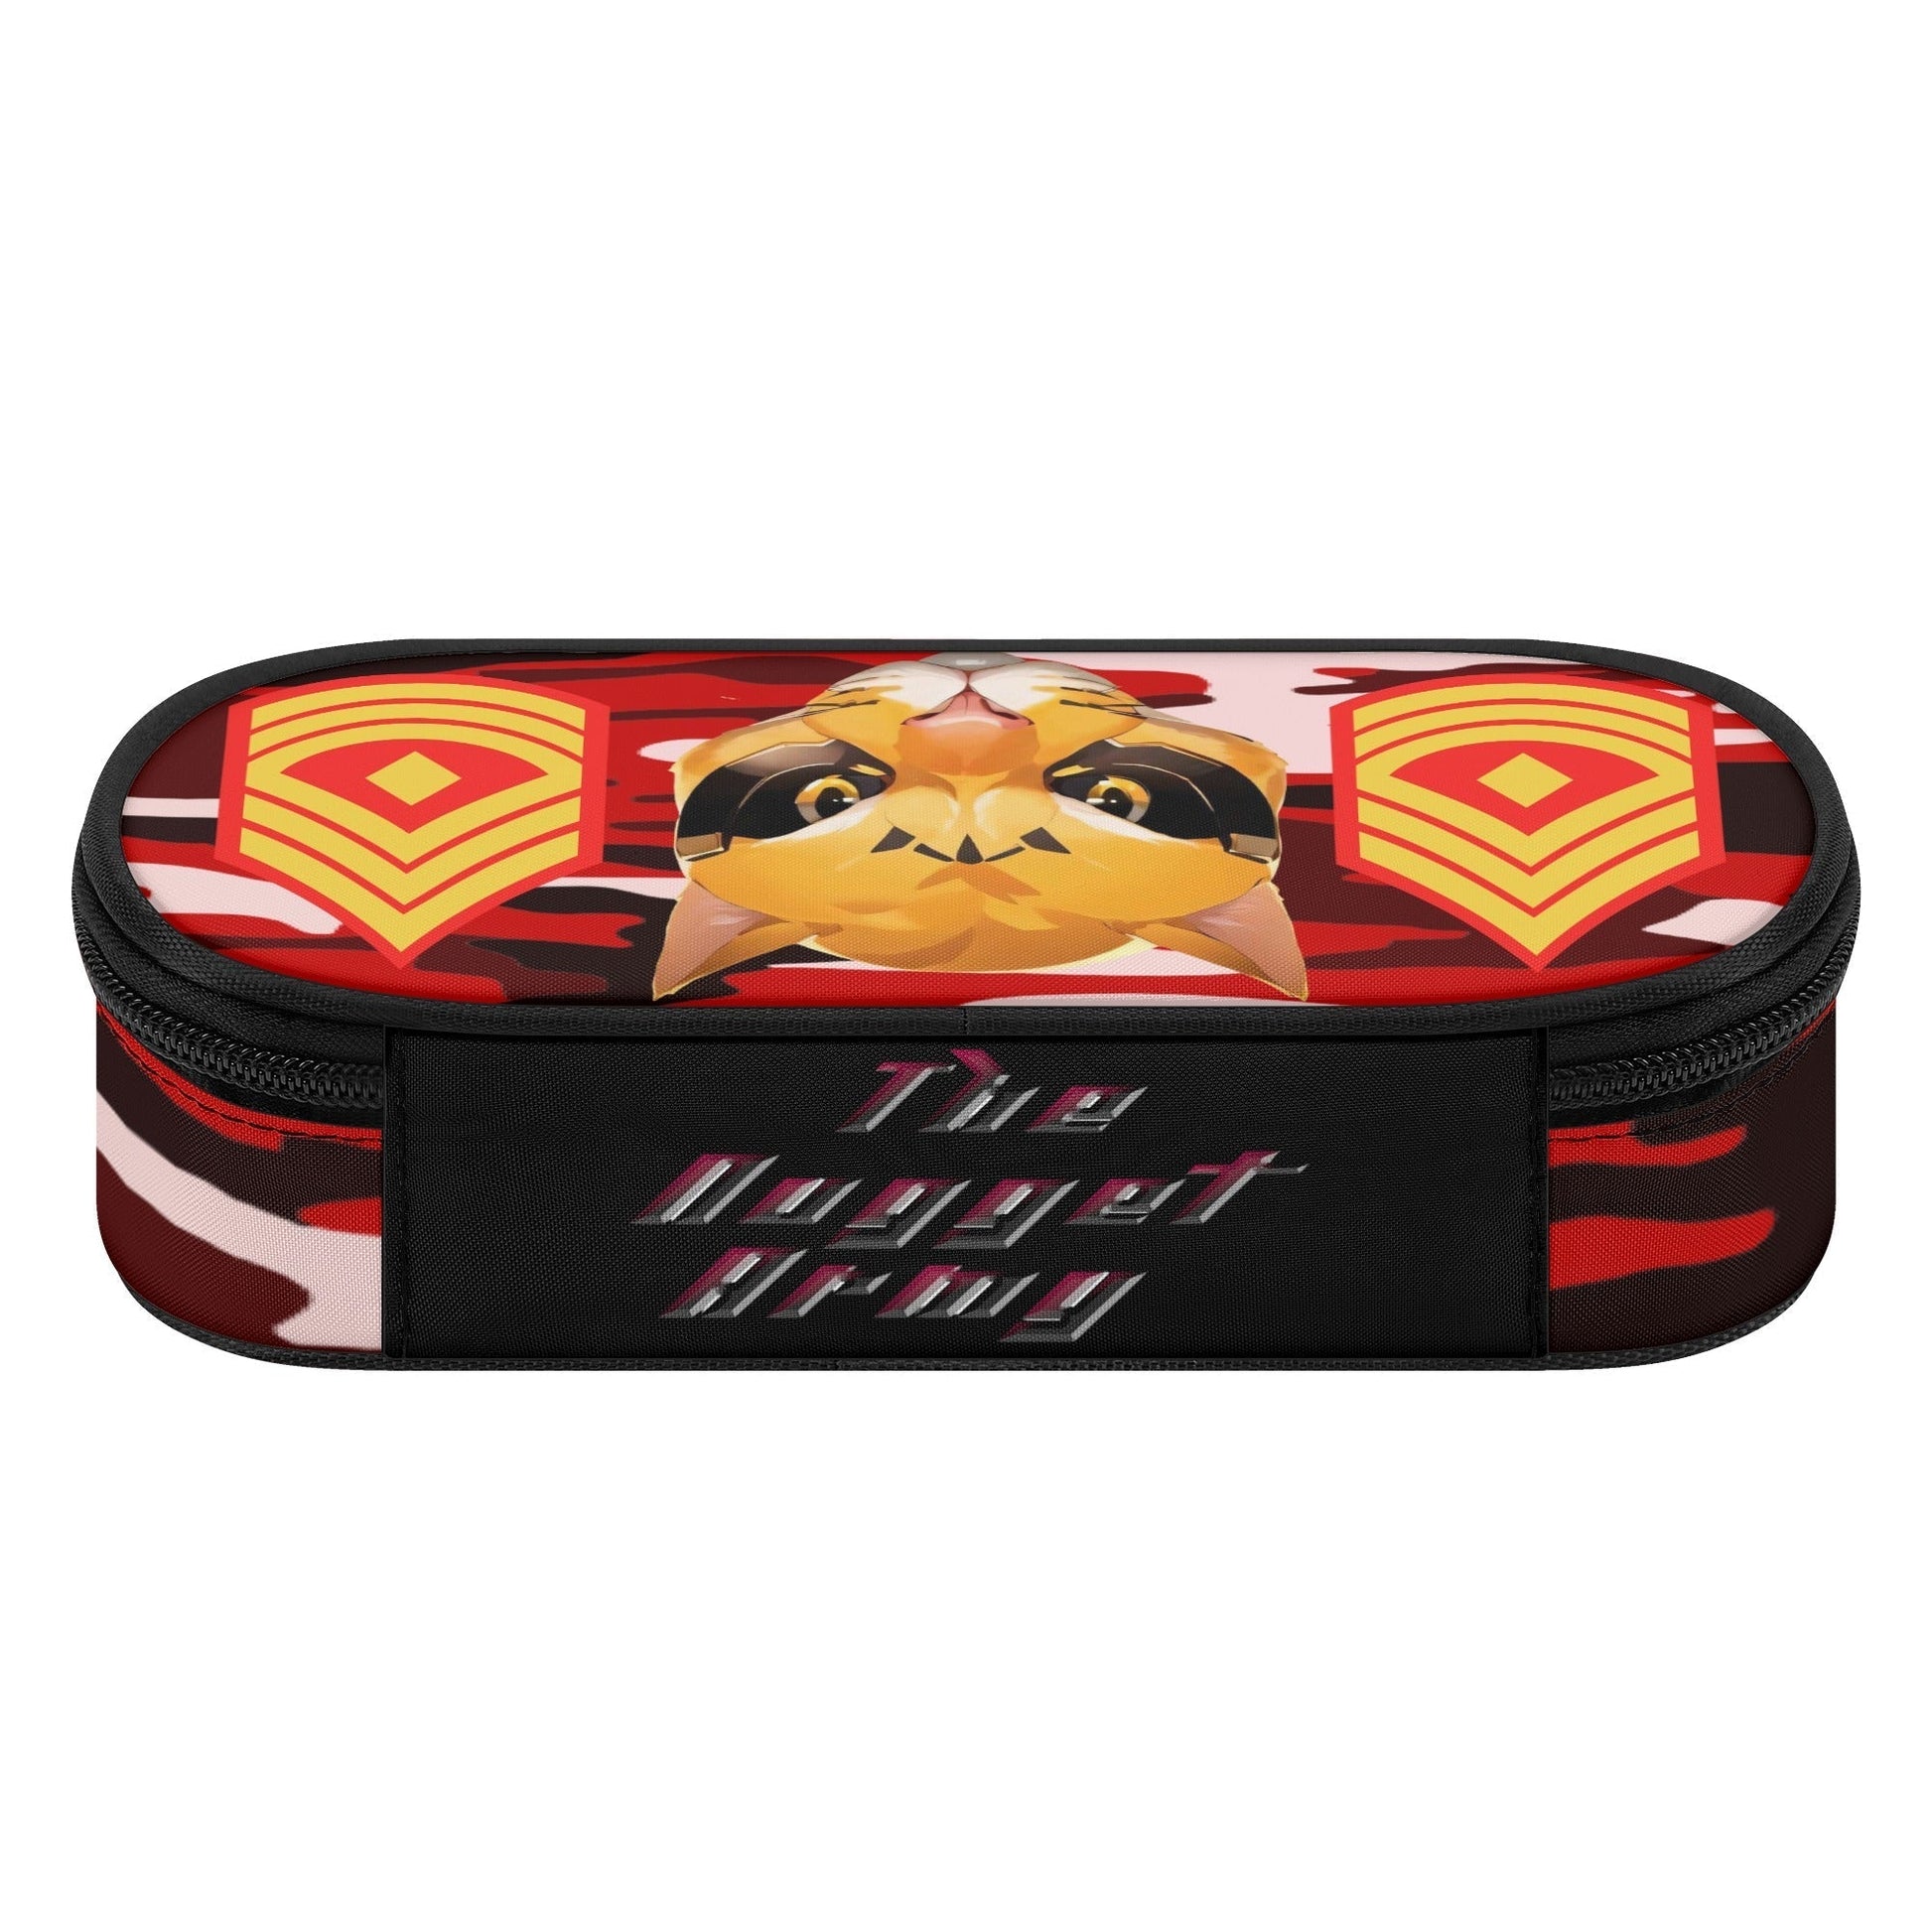 Stand out  with the  Nugget Army 3-Layer Pencil Case  available at Hey Nugget. Grab yours today!